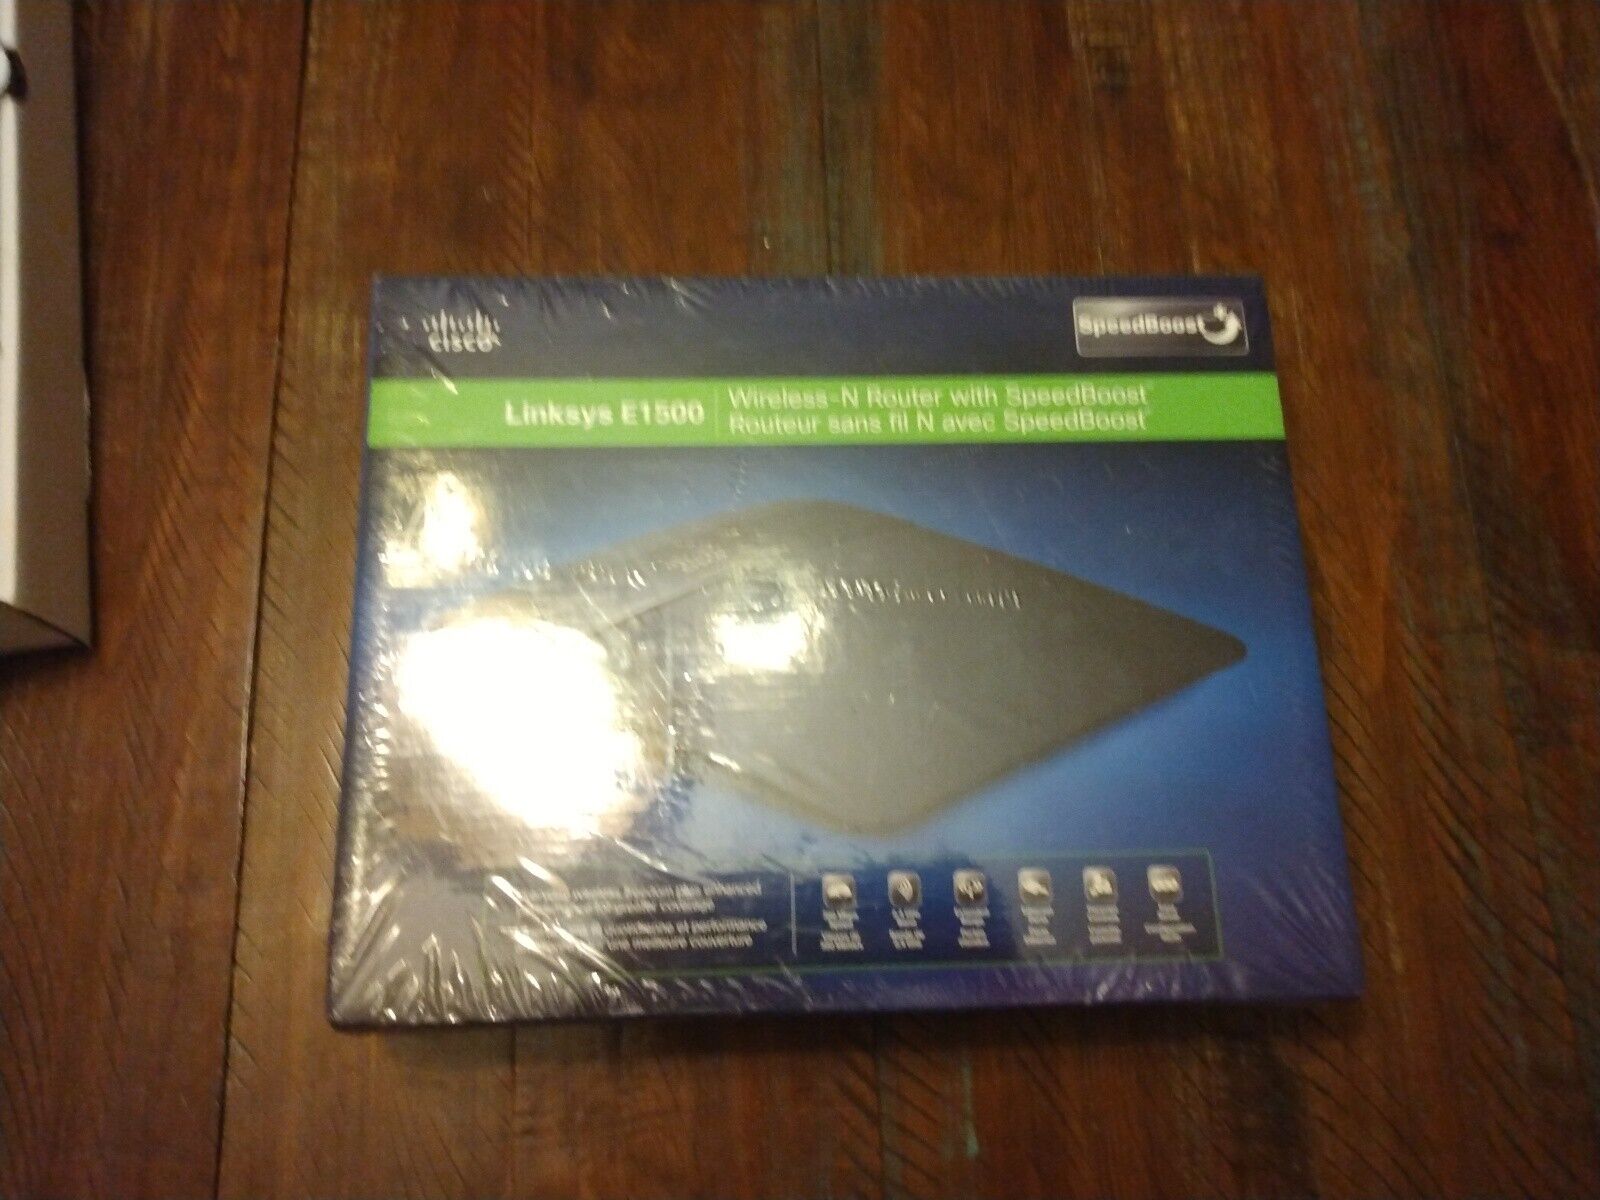 Used LINKSYS E1500 Wireless Router Good Condition